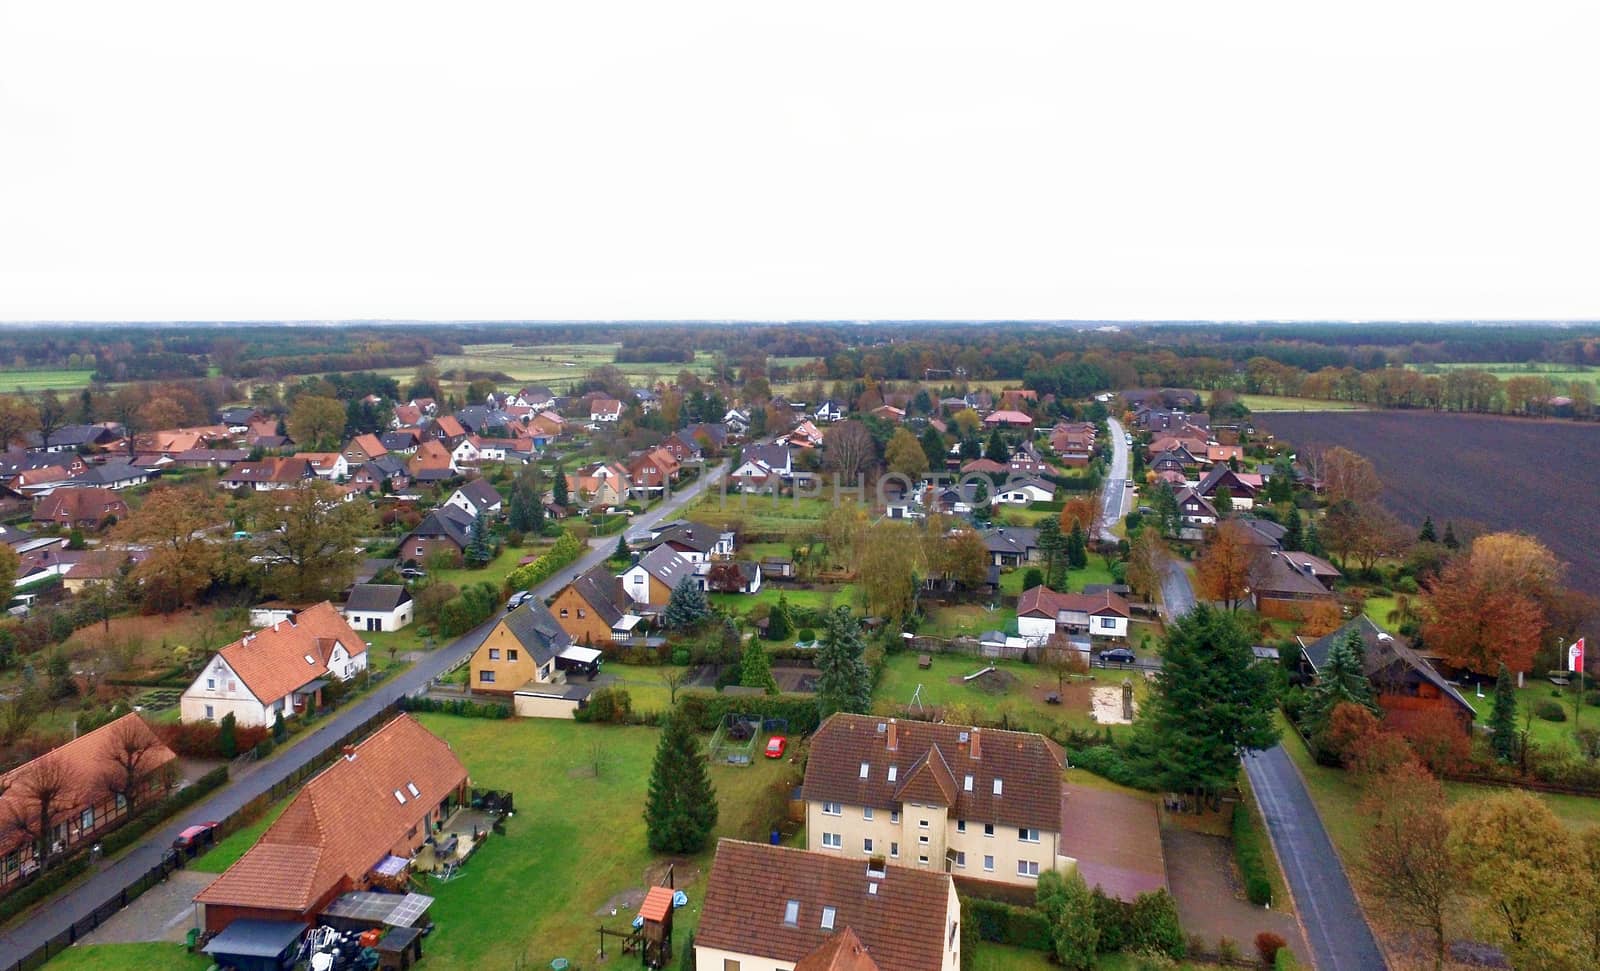 Aerial photograph of a suburb in Germany with houses, streets and gardens